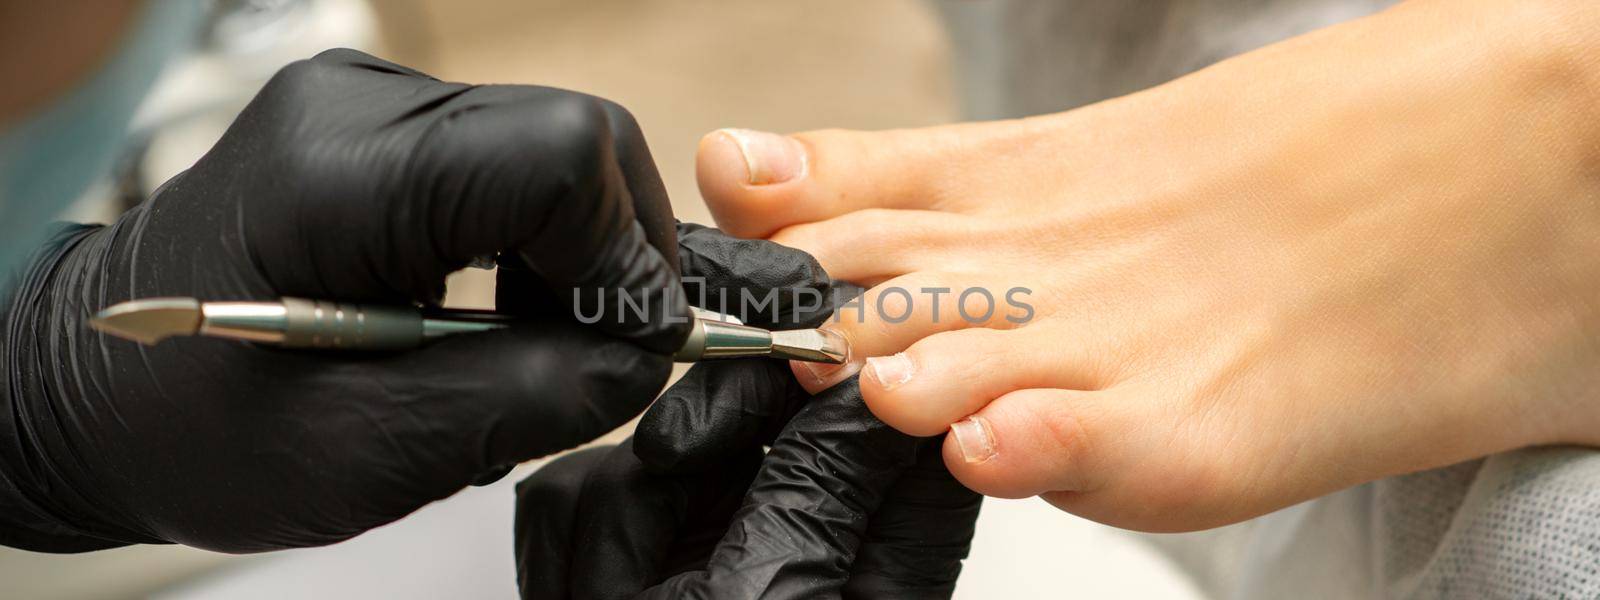 Cuticle Removal on Toes. Hands in black gloves of pedicure master remove cuticle on female toes by pusher